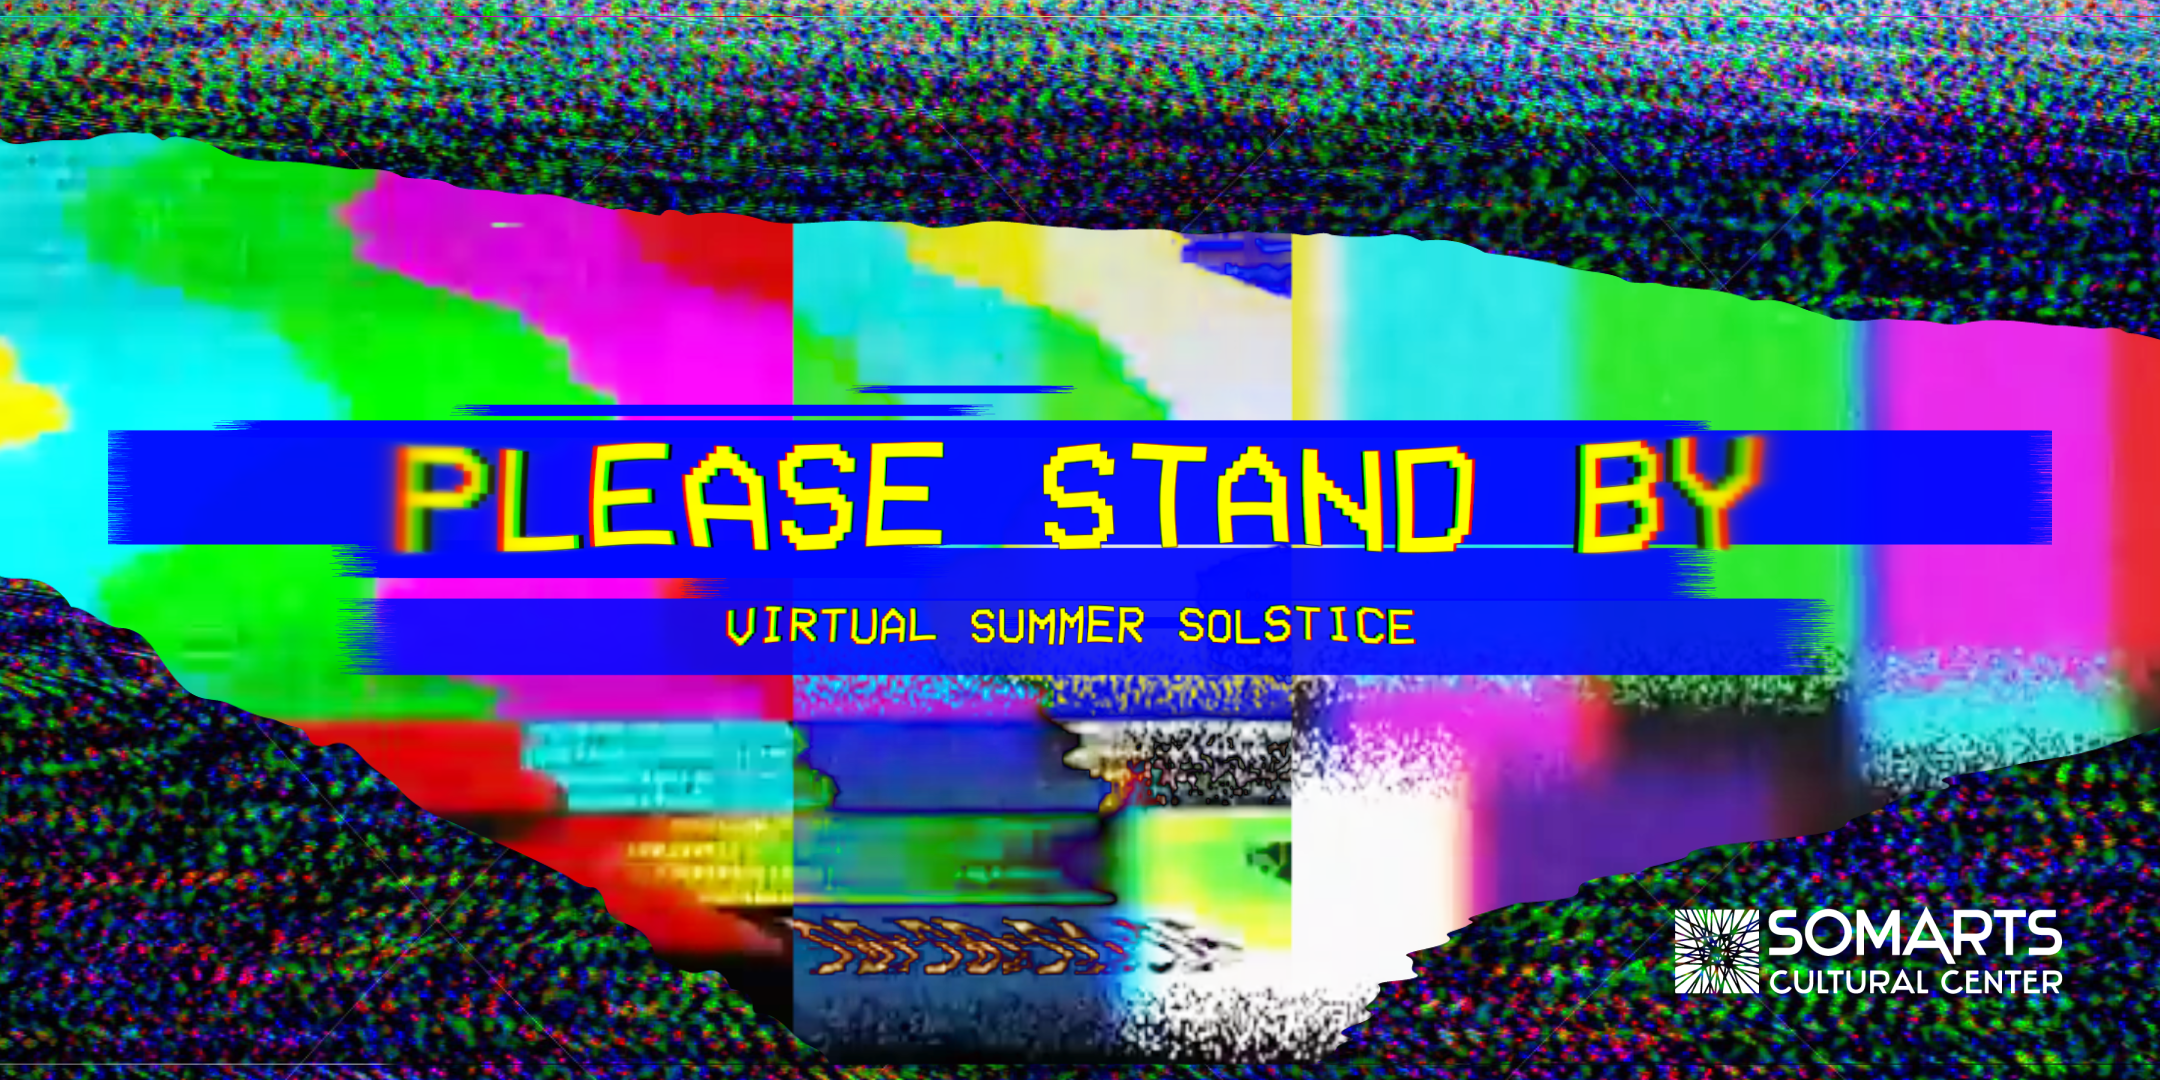 SOMArts' transforms passivity into action with Please Stand By